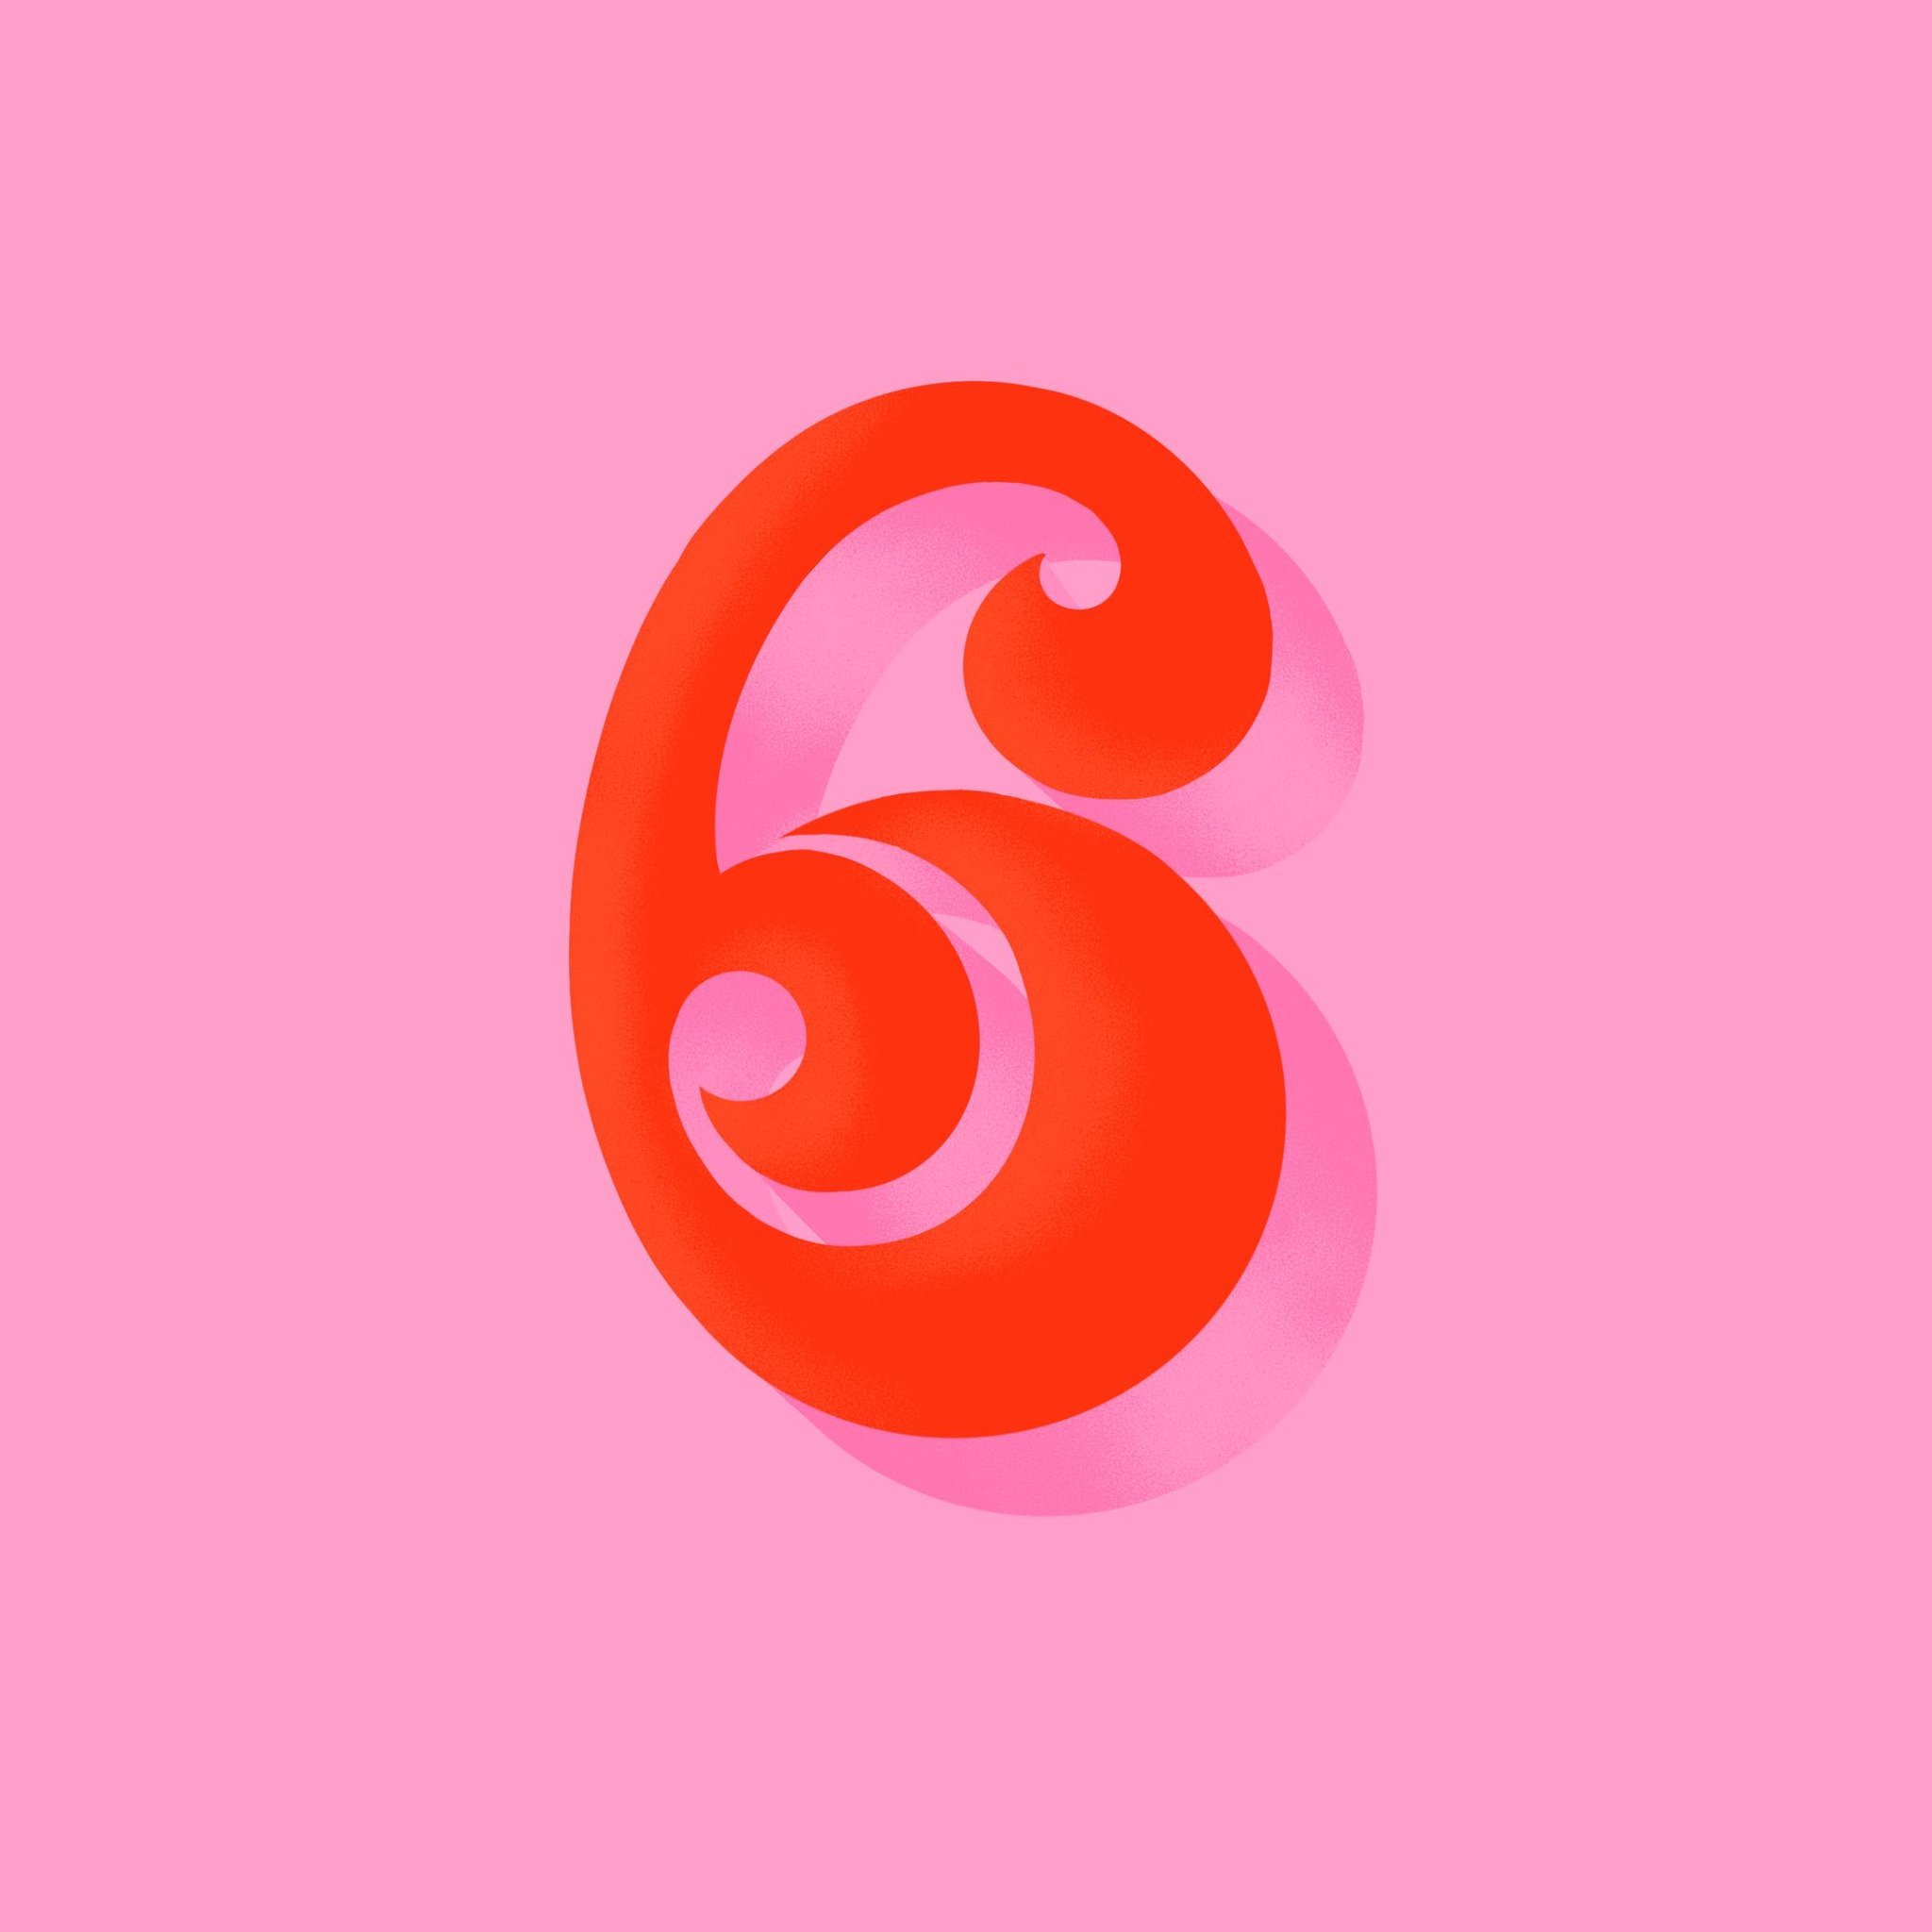 33/36 - 6 🍒

For this year&rsquo;s #36daysoftype challenge, I wanted to create a cohesive series of letters and numbers that had bold exaggerated flourishes with a delicious pastel vibe! 

Tools used: 
iPad Pro + Apple pencil 
Procreate app
Retro sh